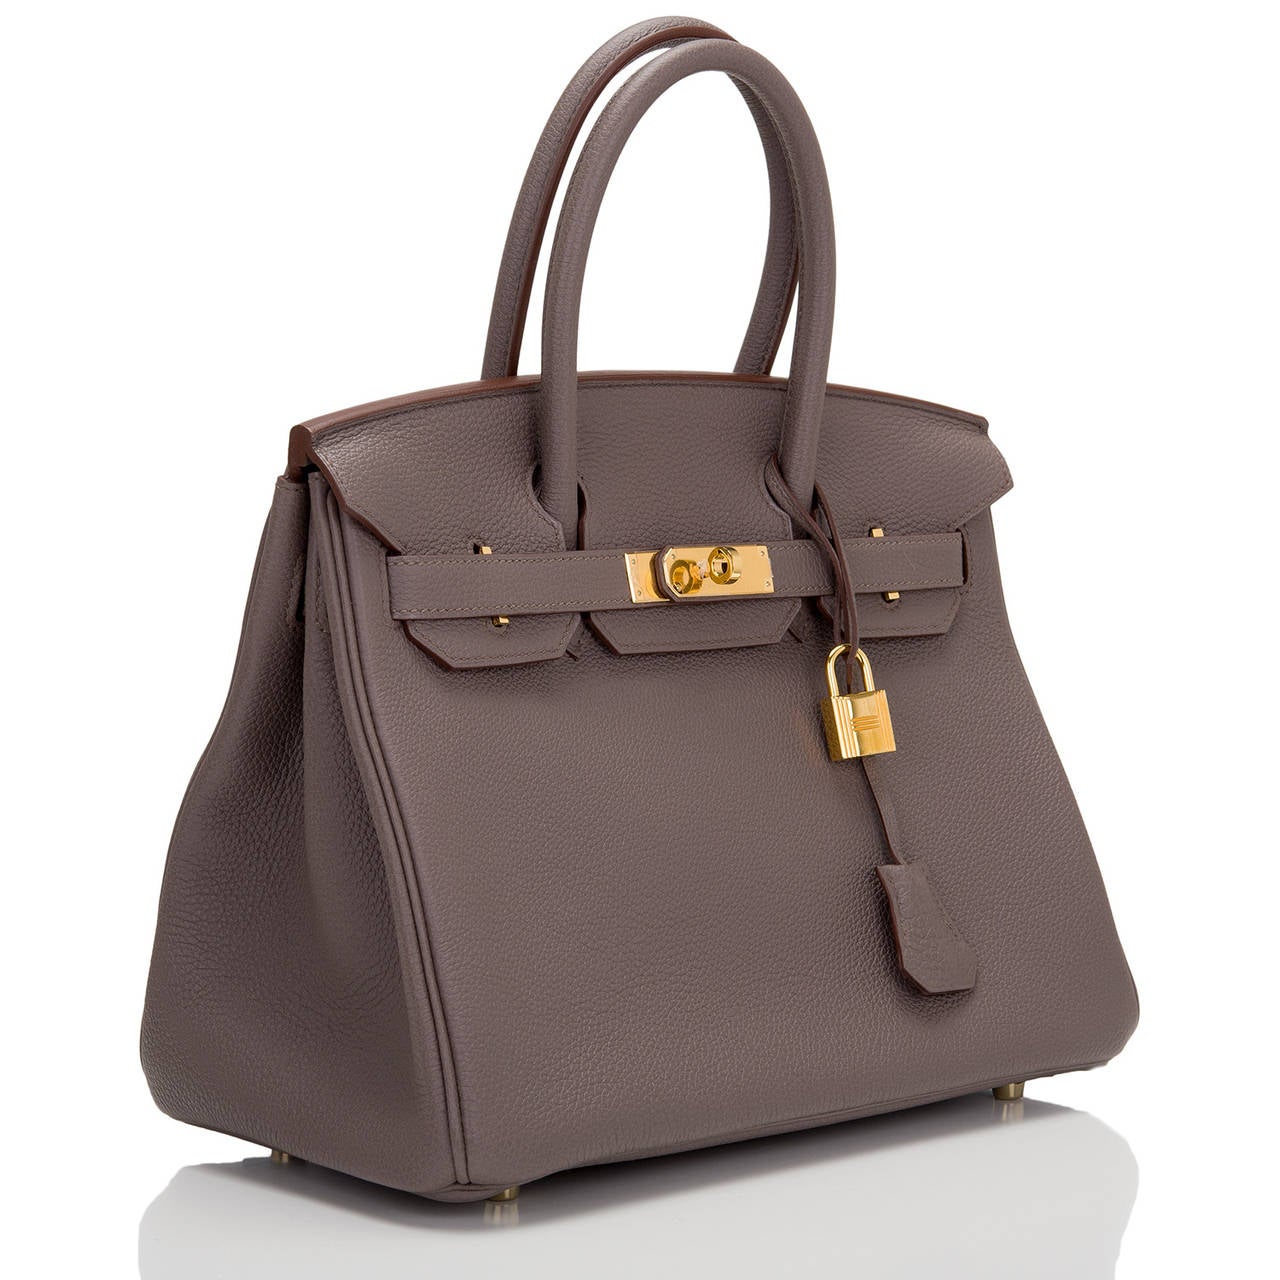 Hermes Etain 30cm in togo (bull) leather with gold hardware.

This Birkin features tonal stitching, front toggle closure, clochette with lock and two keys, and double rolled handles. The interior is lined in Etain chevre with one zip pocket with